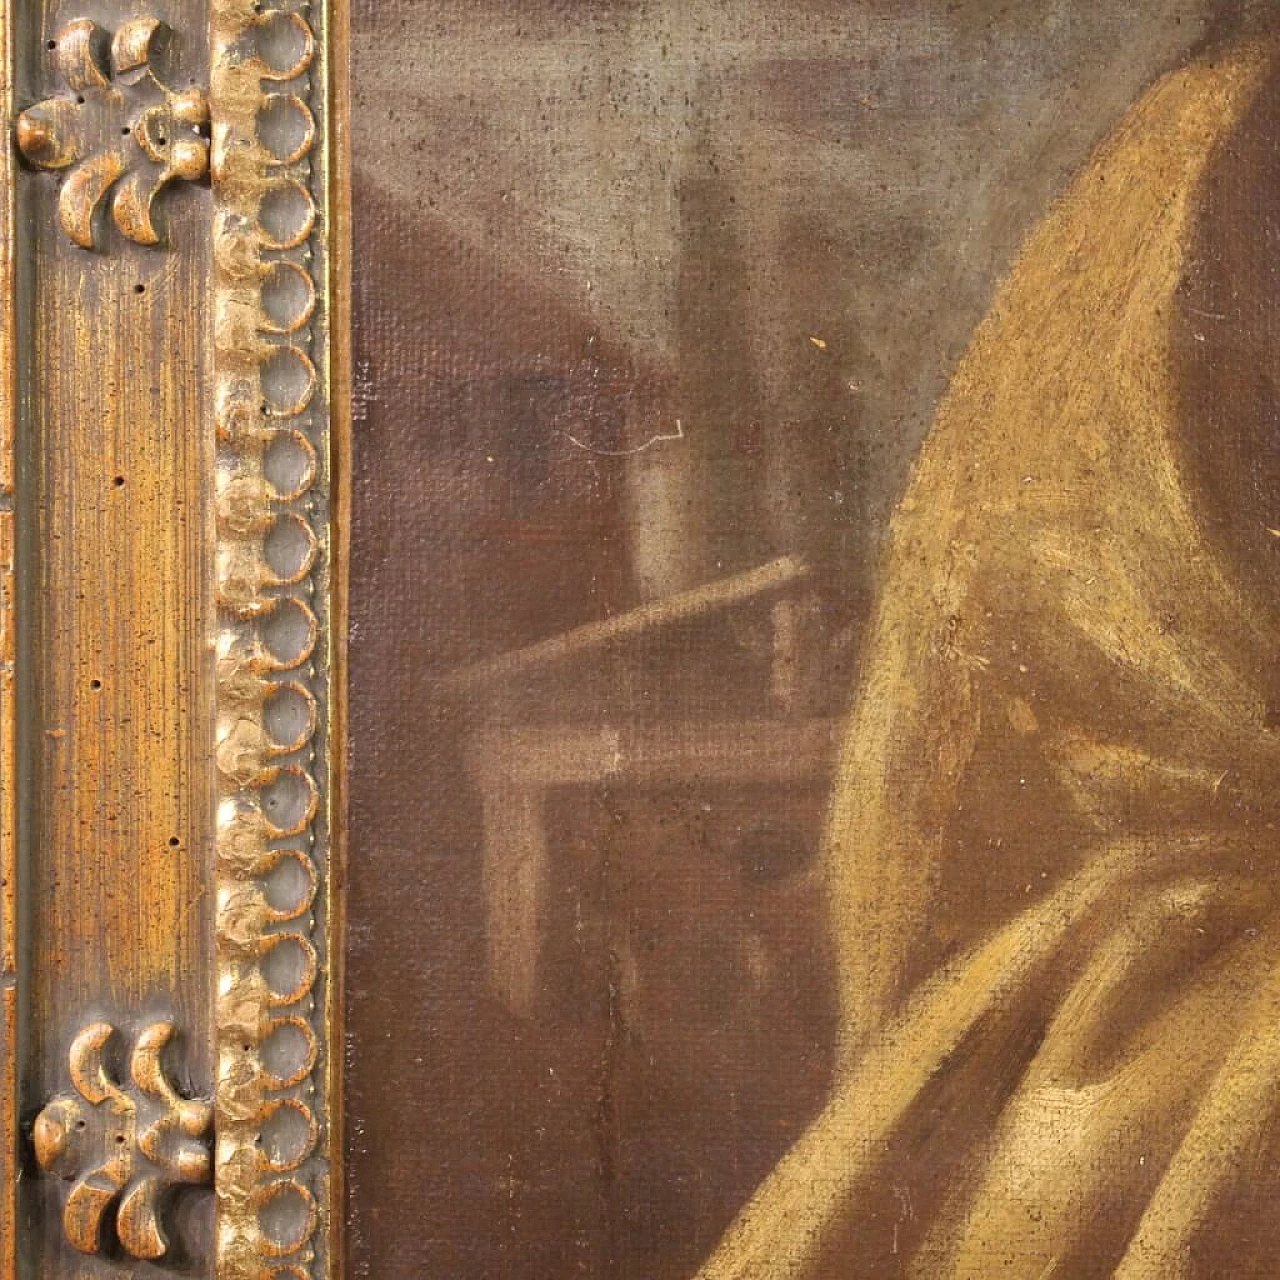 Magdalene, oil painting on canvas, late 17th century 5